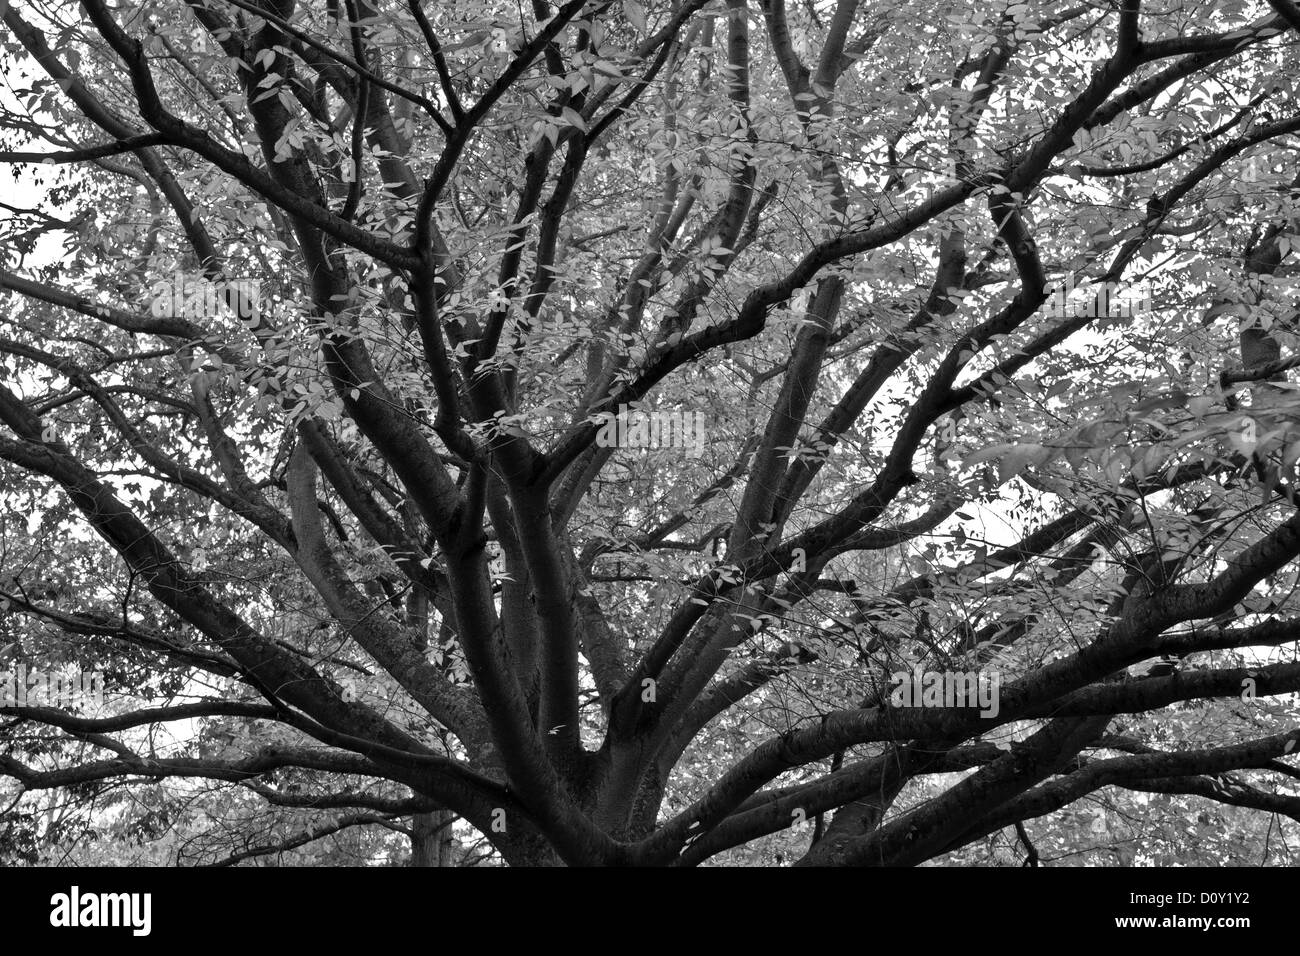 Beautiful black and white image of a tree's upward branches taken in autumn. Stock Photo